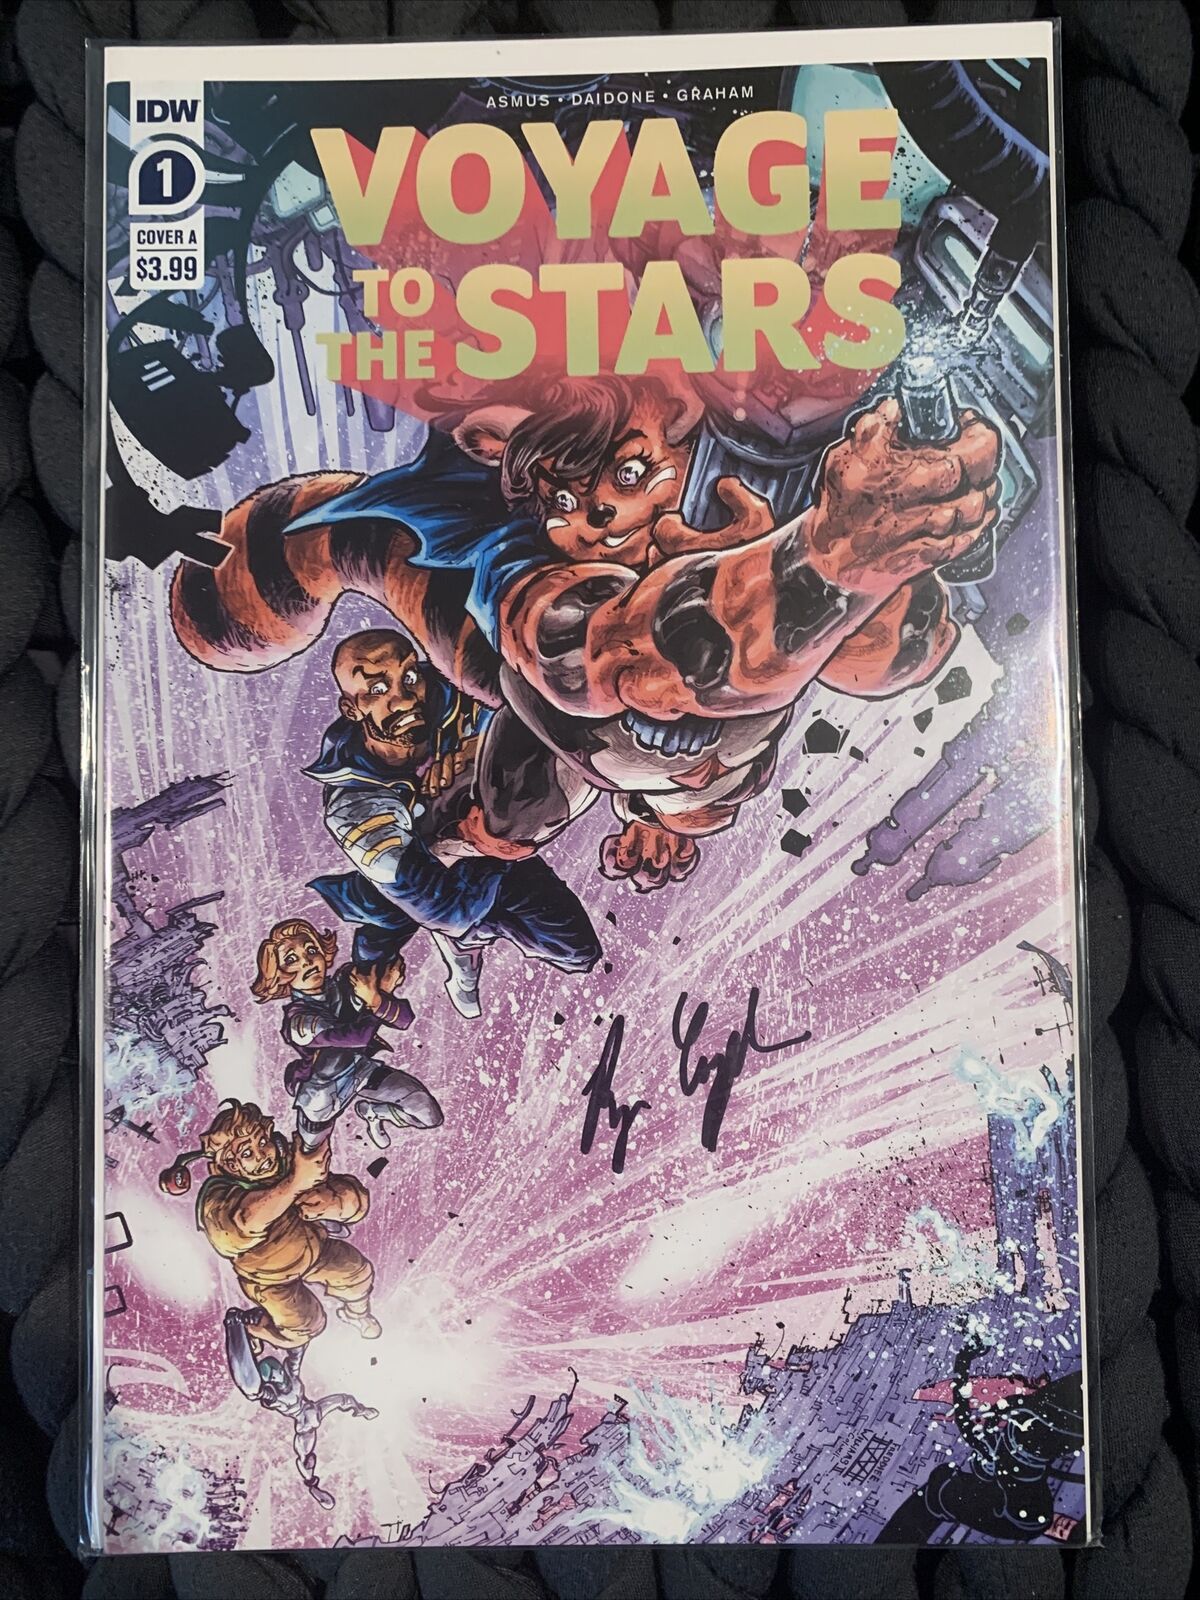 Voyage to the Stars #1 Signed by Ryan Copple (IDW 2020)